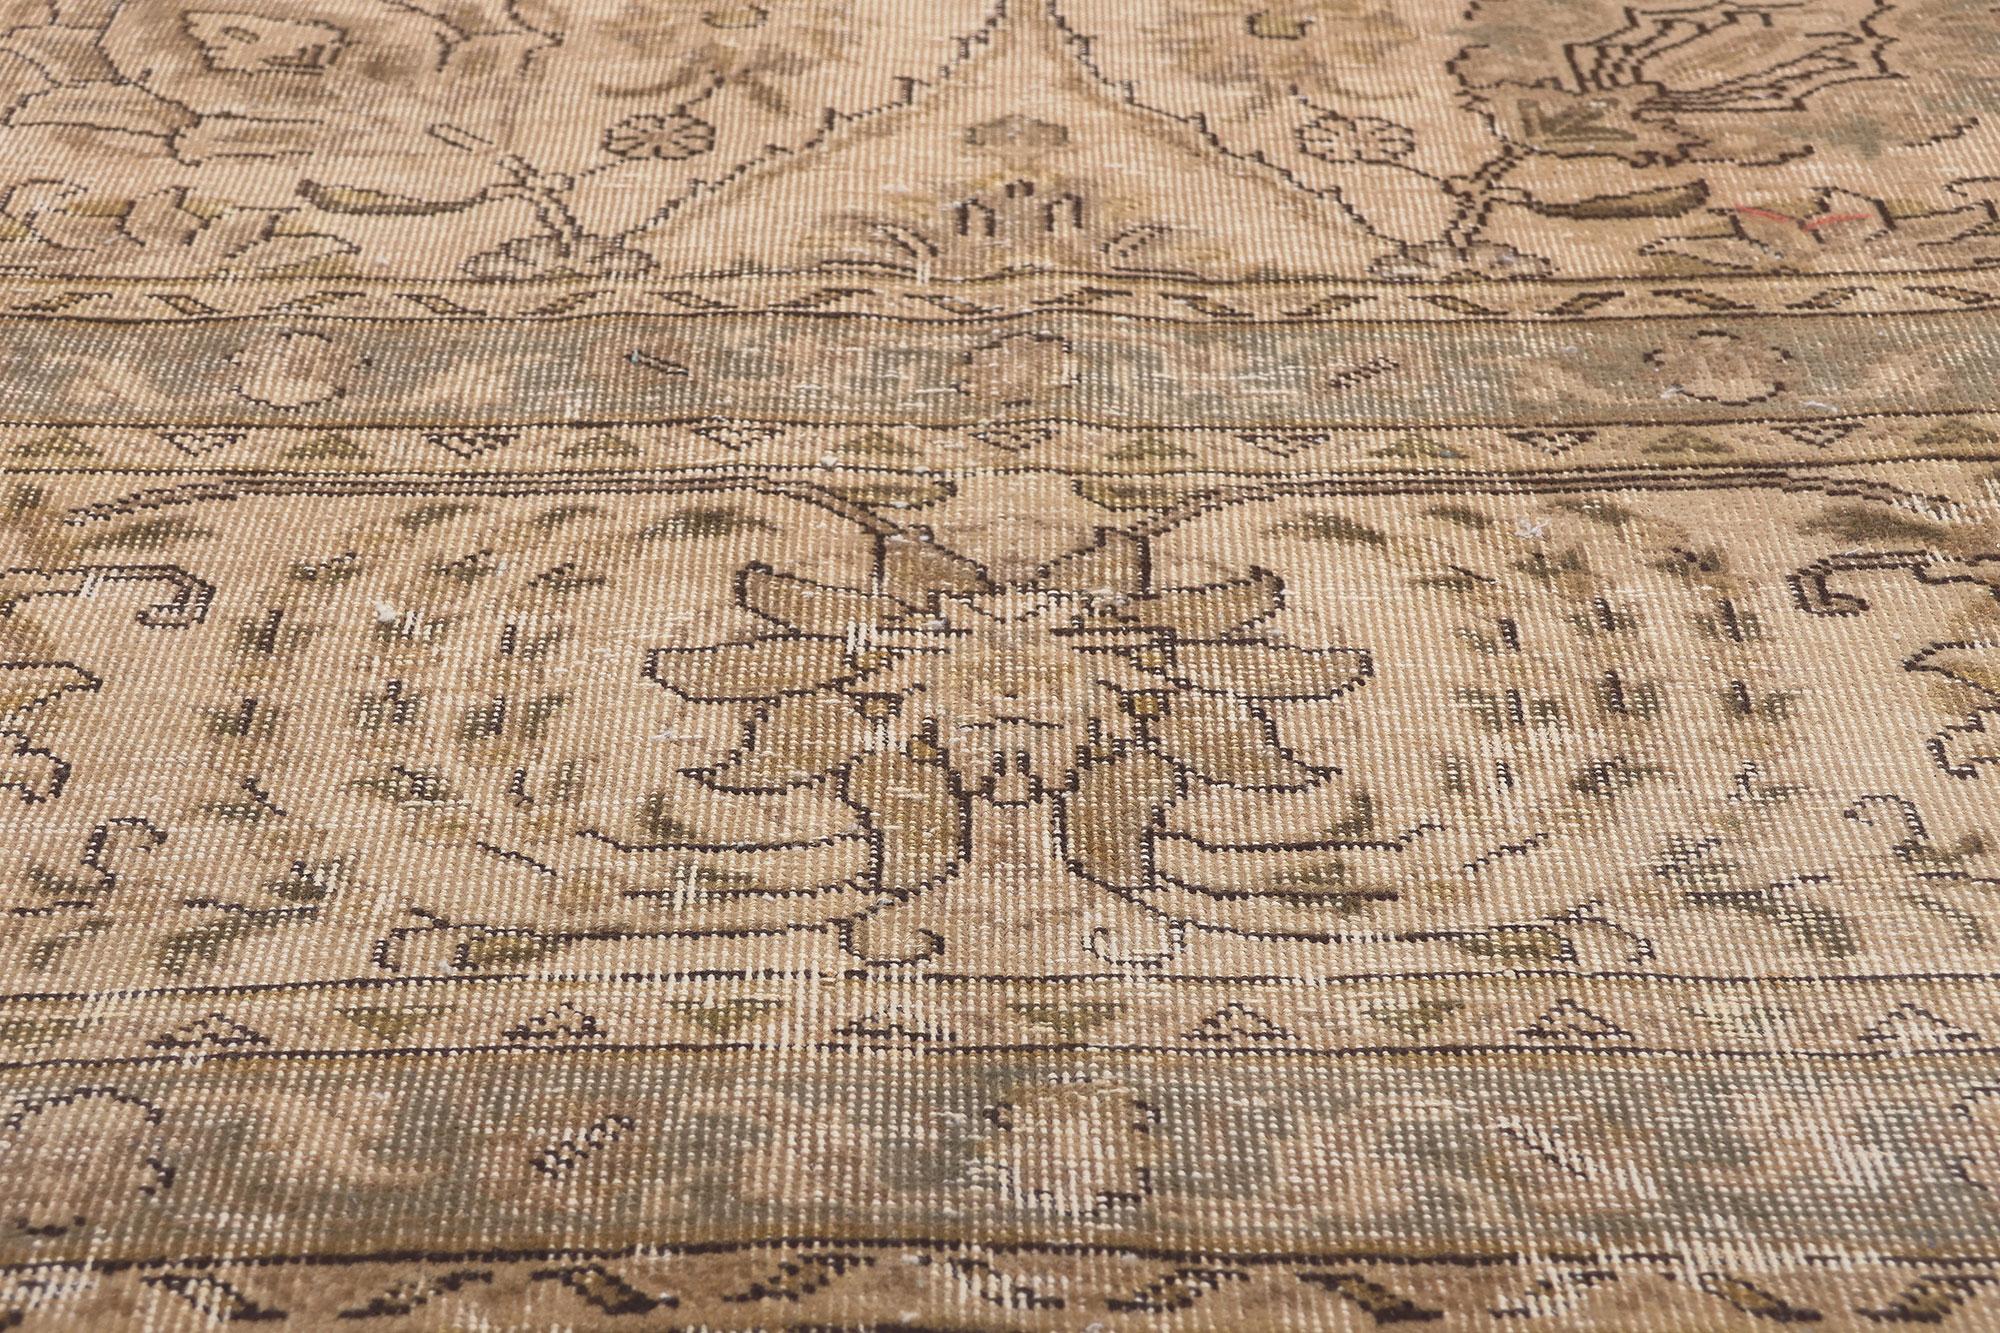 Rustic Vintage Persian Tabriz Rug Warm Neutral Earth-Tone Colors In Distressed Condition For Sale In Dallas, TX